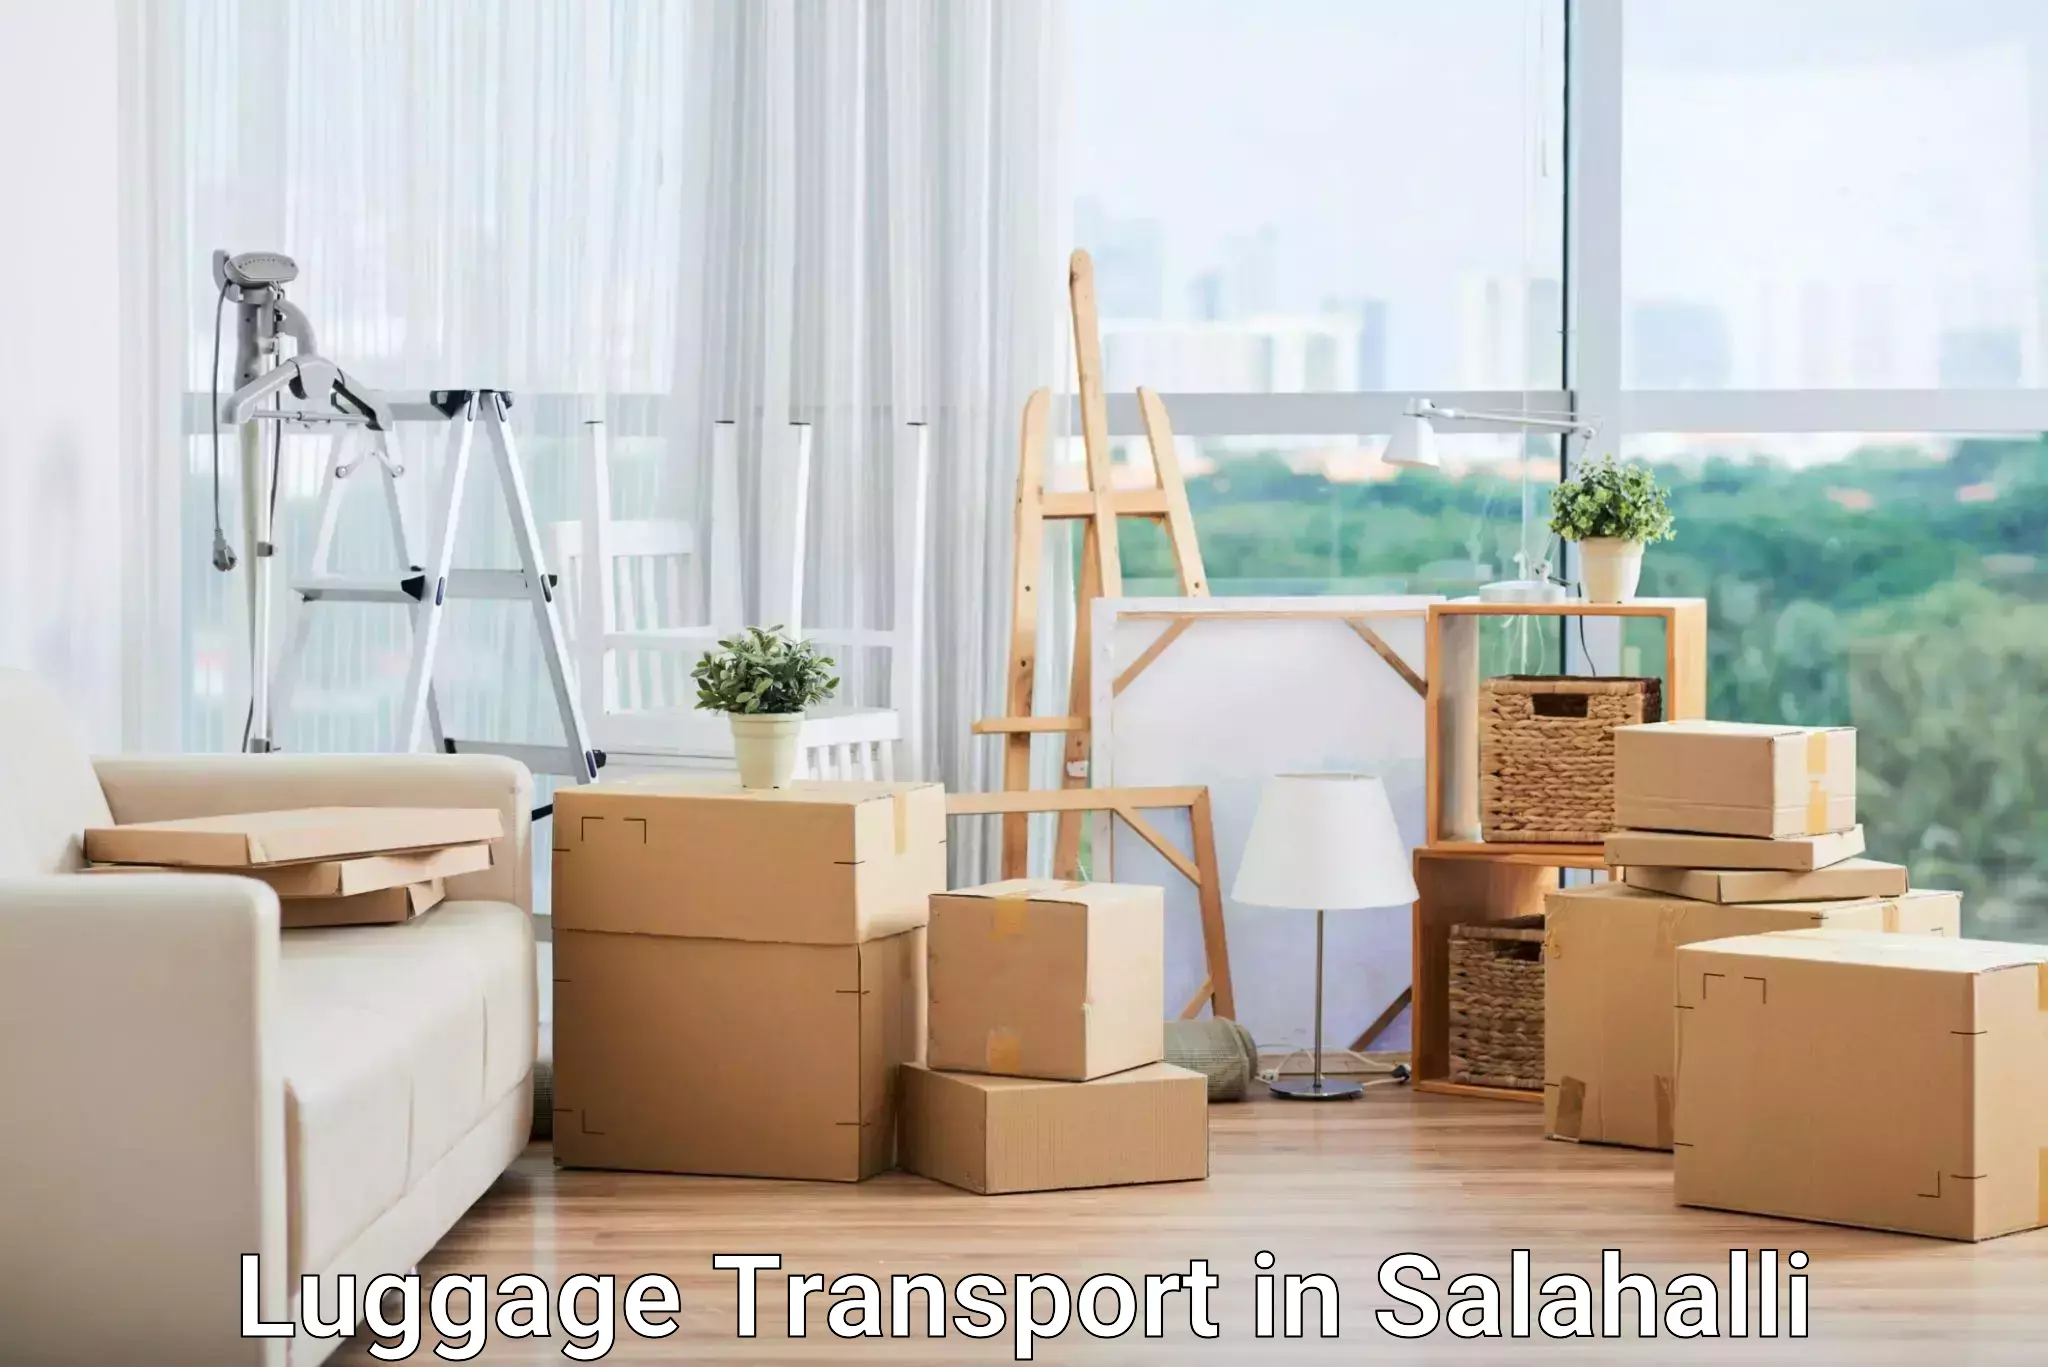 Express luggage delivery in Salahalli